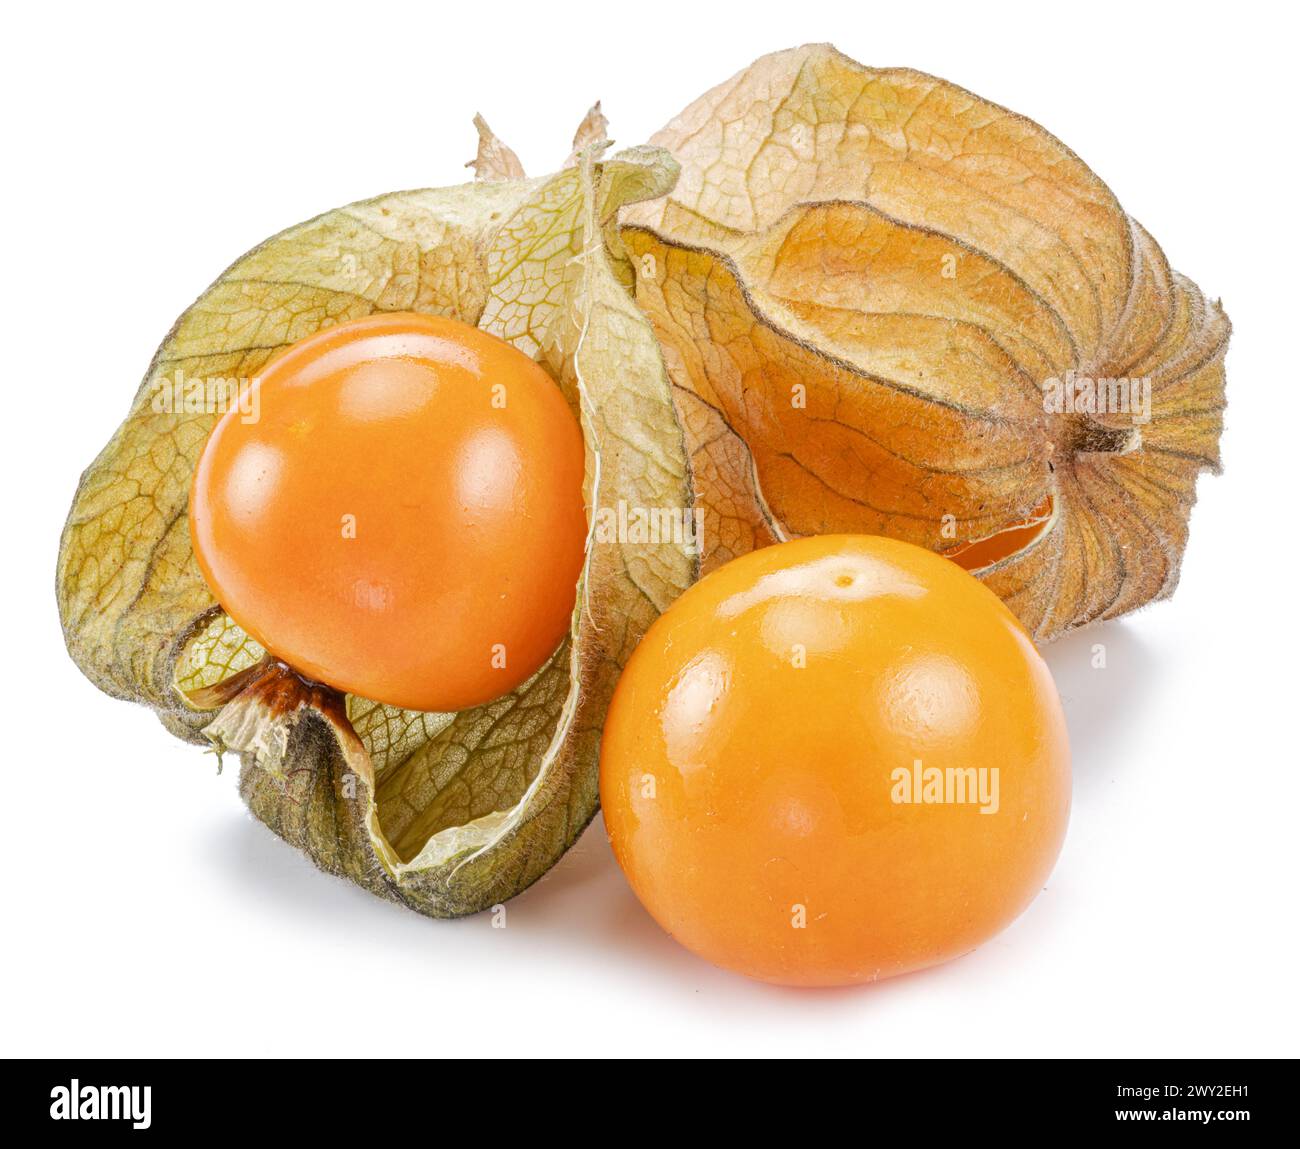 Ripe physalis or golden berry fruits in calyx isolated on white background. Stock Photo